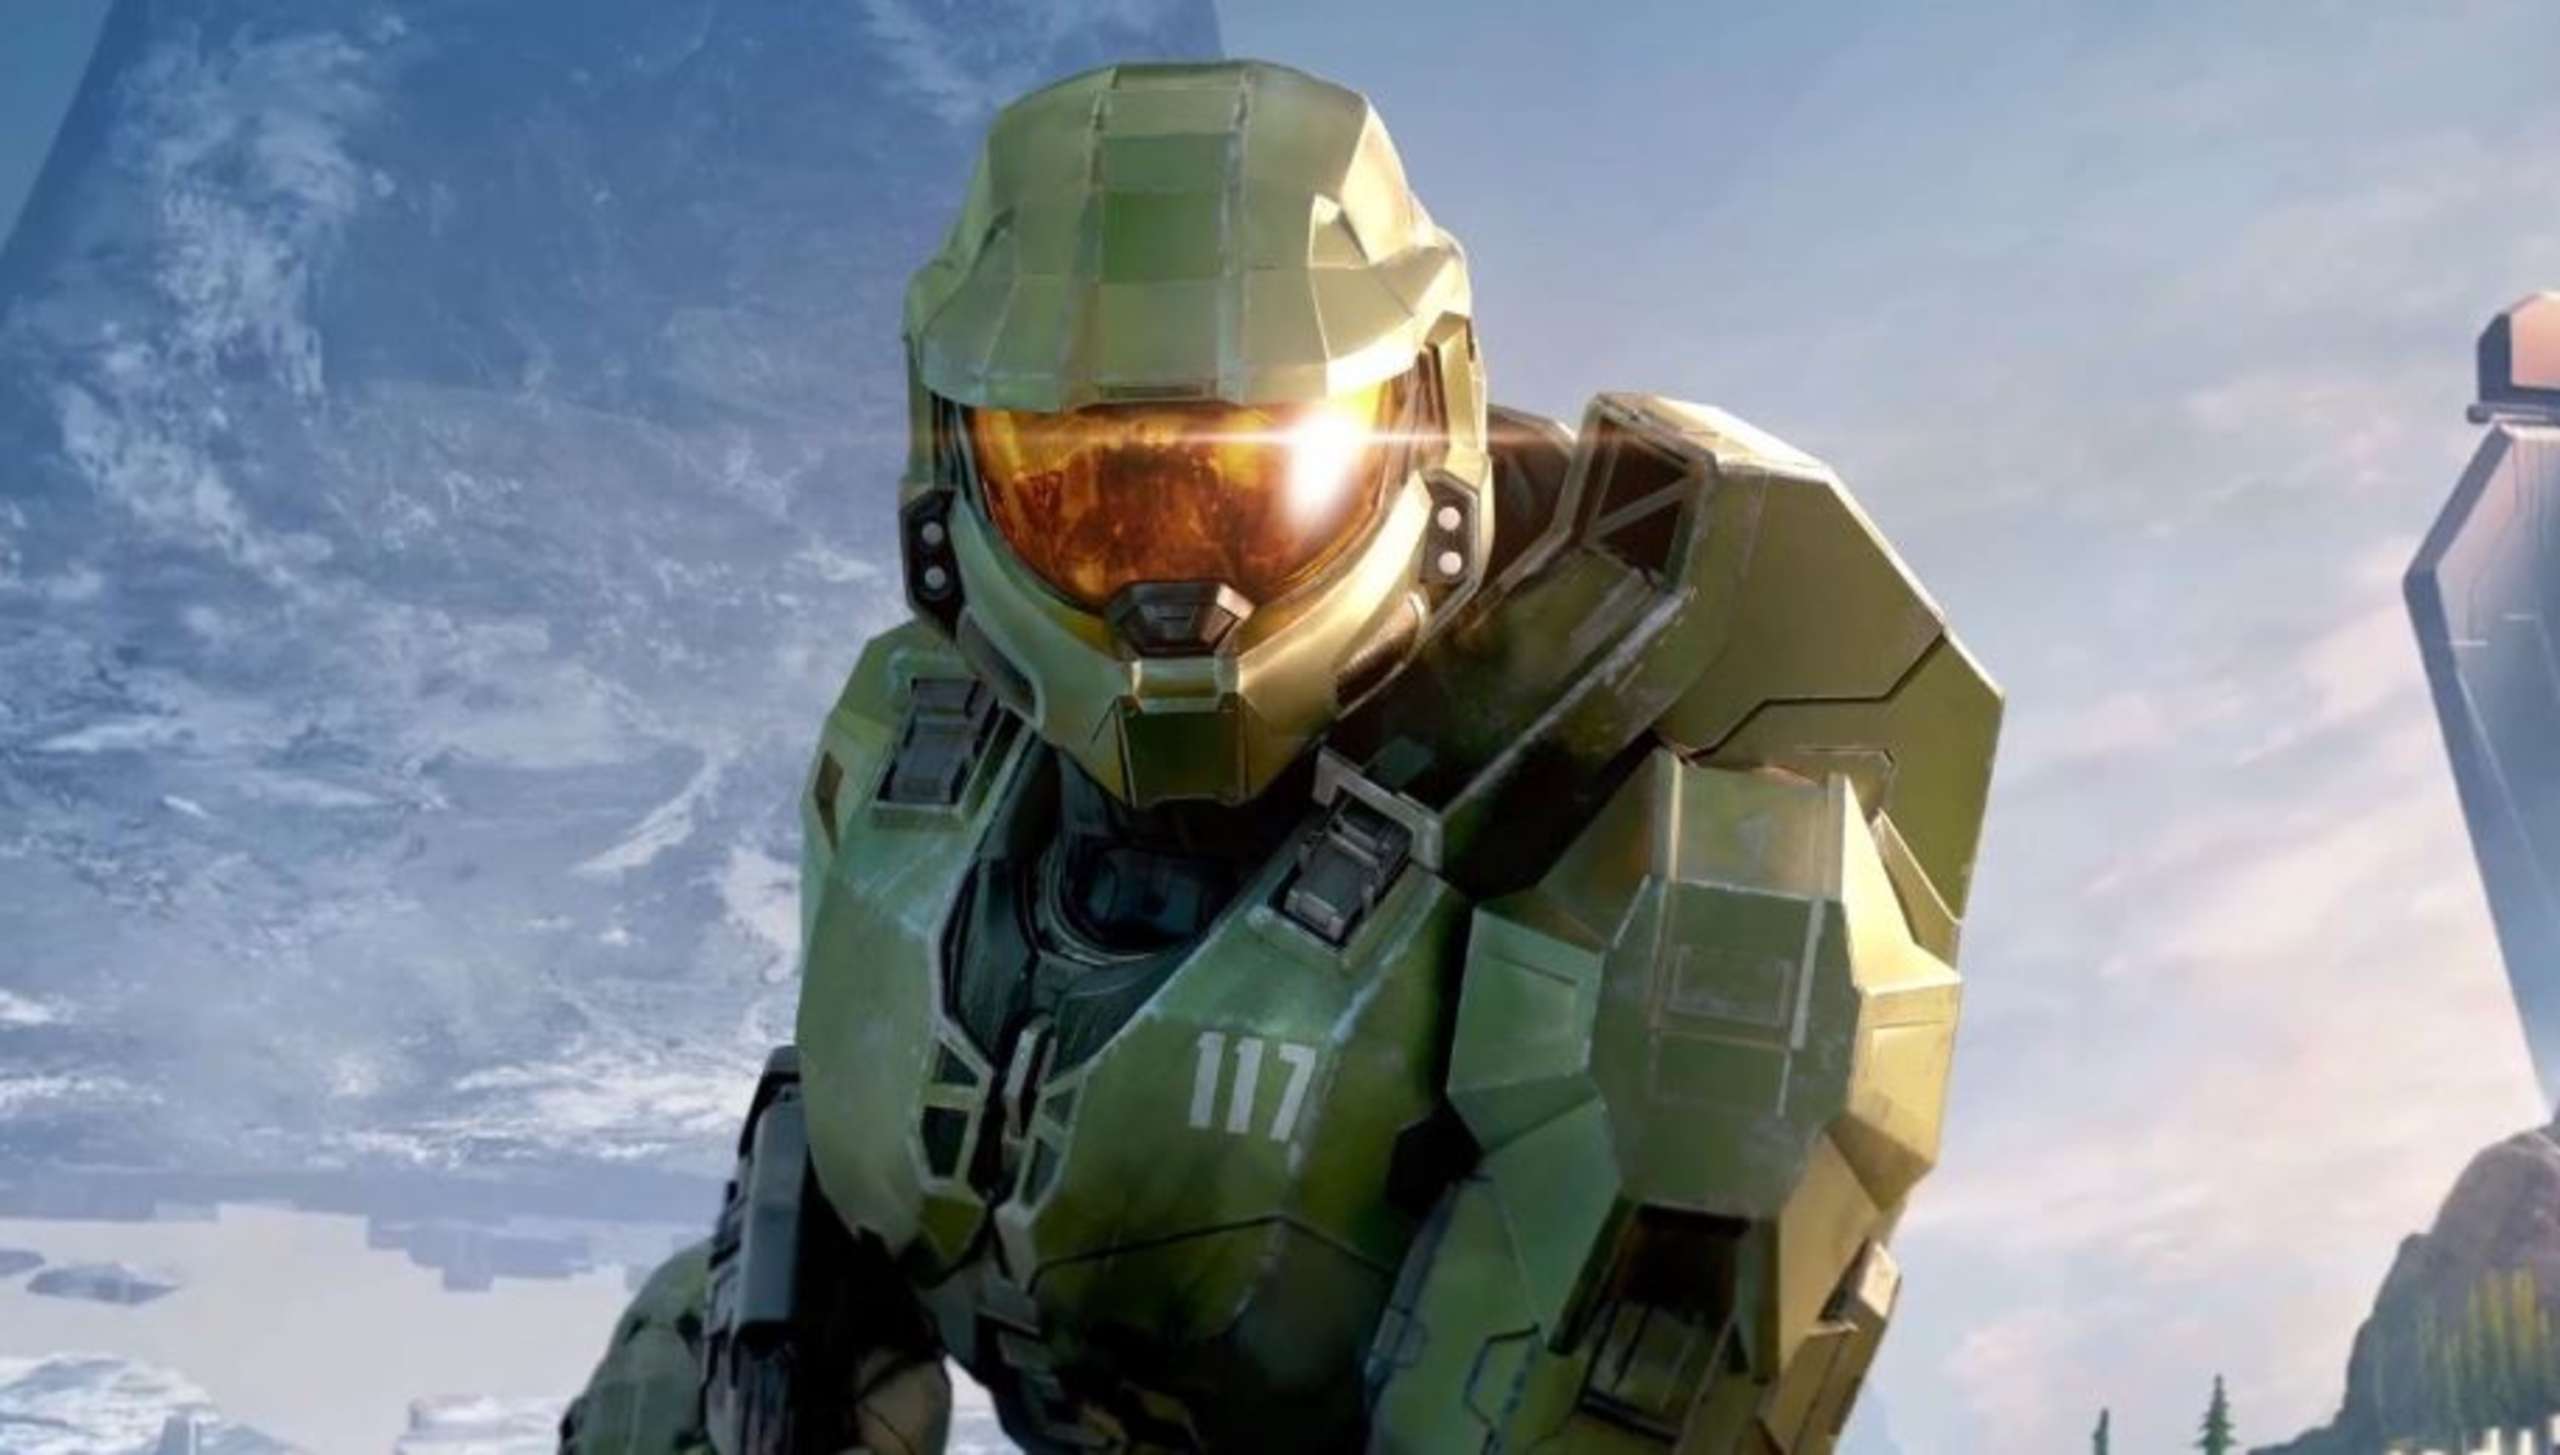 Halo Infinite According To Reports, 343 Industries Has Decided To Stop Using Its Creative Engine And Instead Use Unreal Engine Going Forward